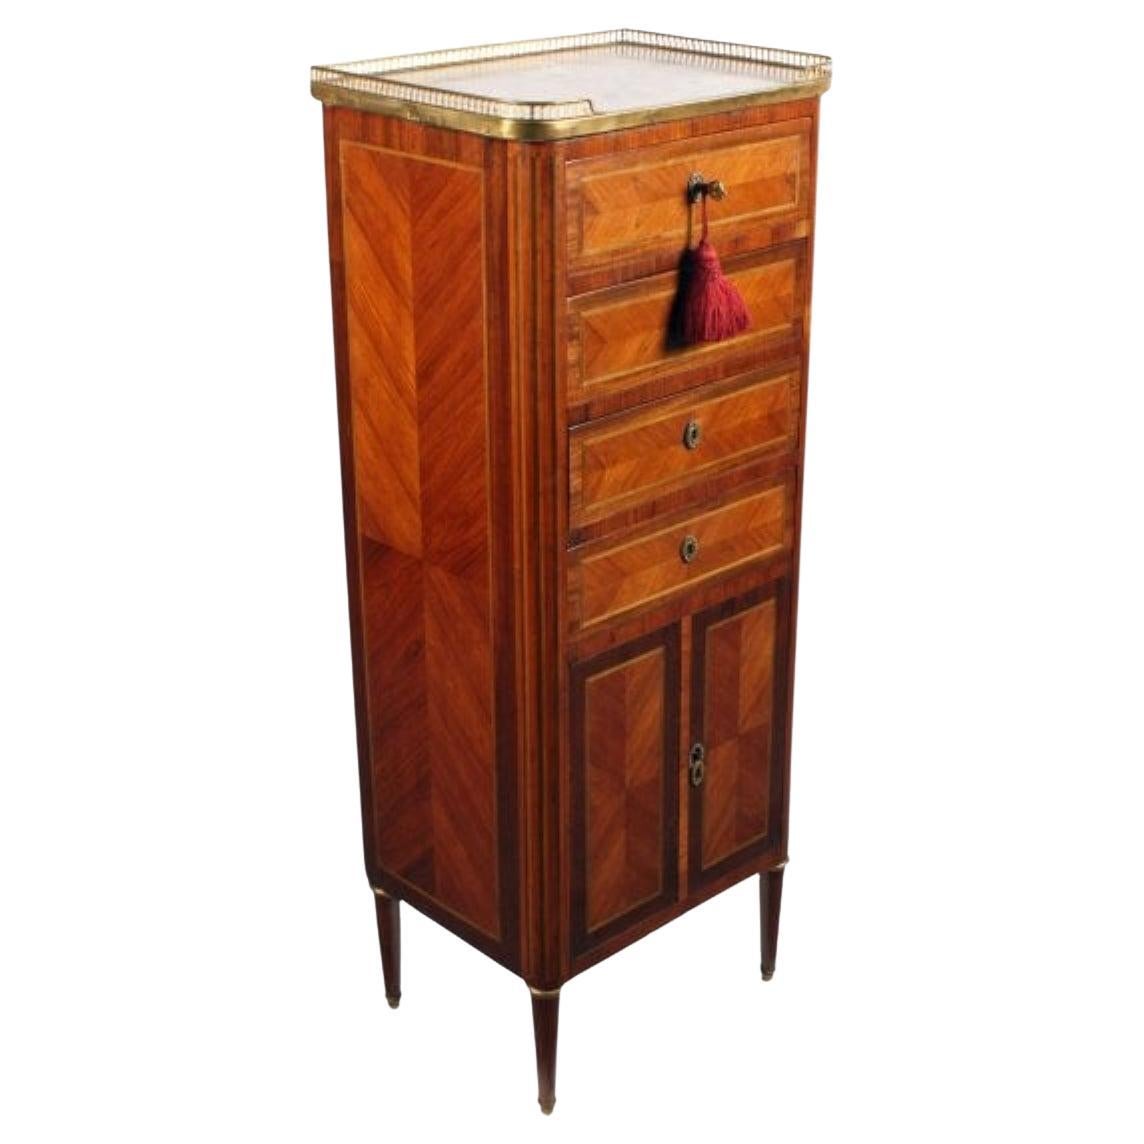 Slim French Kingwood Marble Top Cabinet, 19th Century